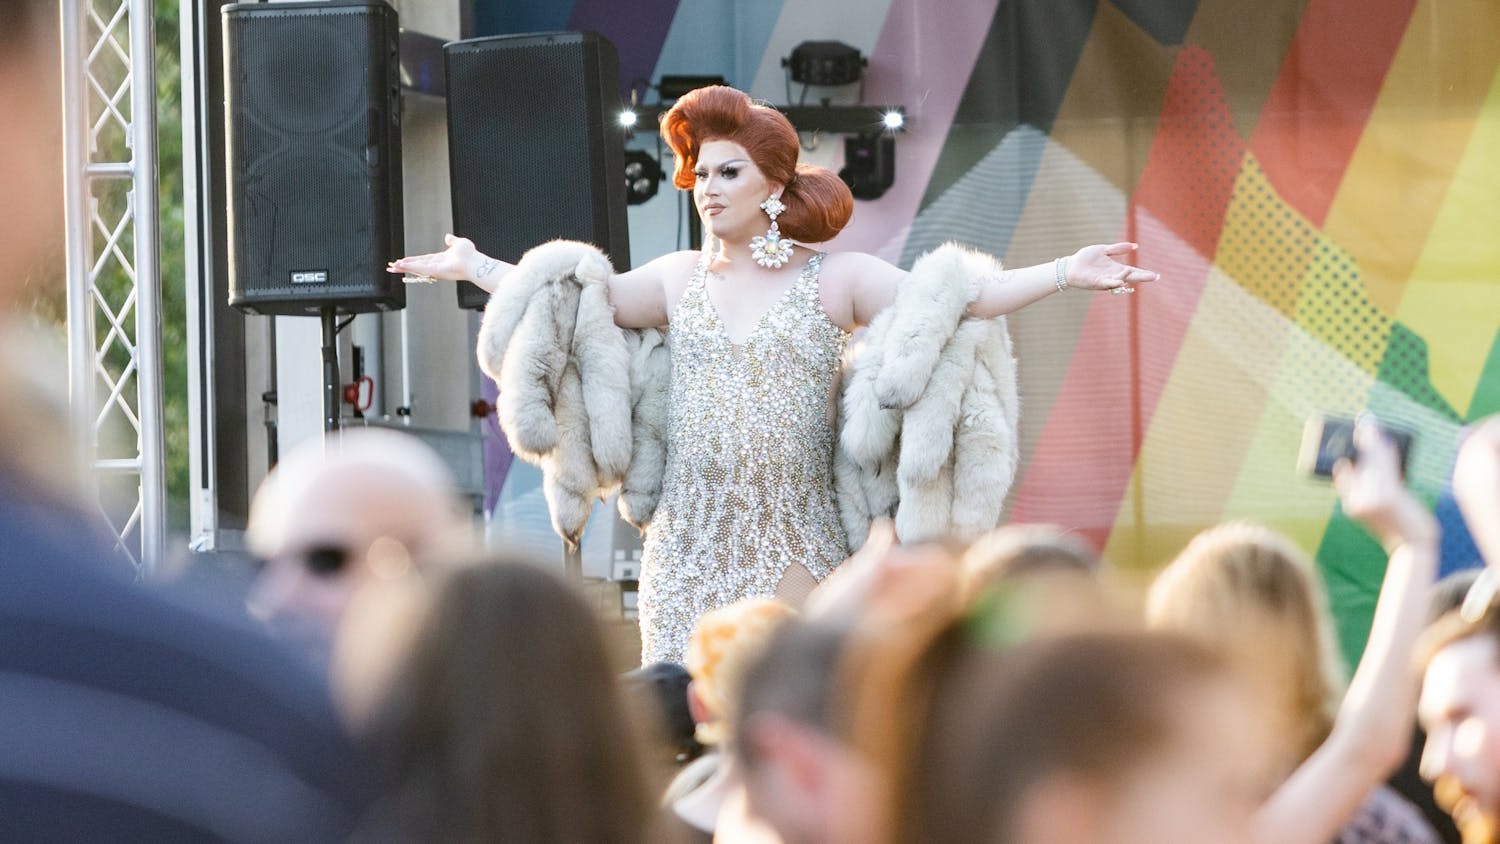 A drag queen walks across the stage in an attempt to win the title of Miss Outfest 2022 on June 4, 2022. Outfest featured performances, food and vendors in honor of Pride month.